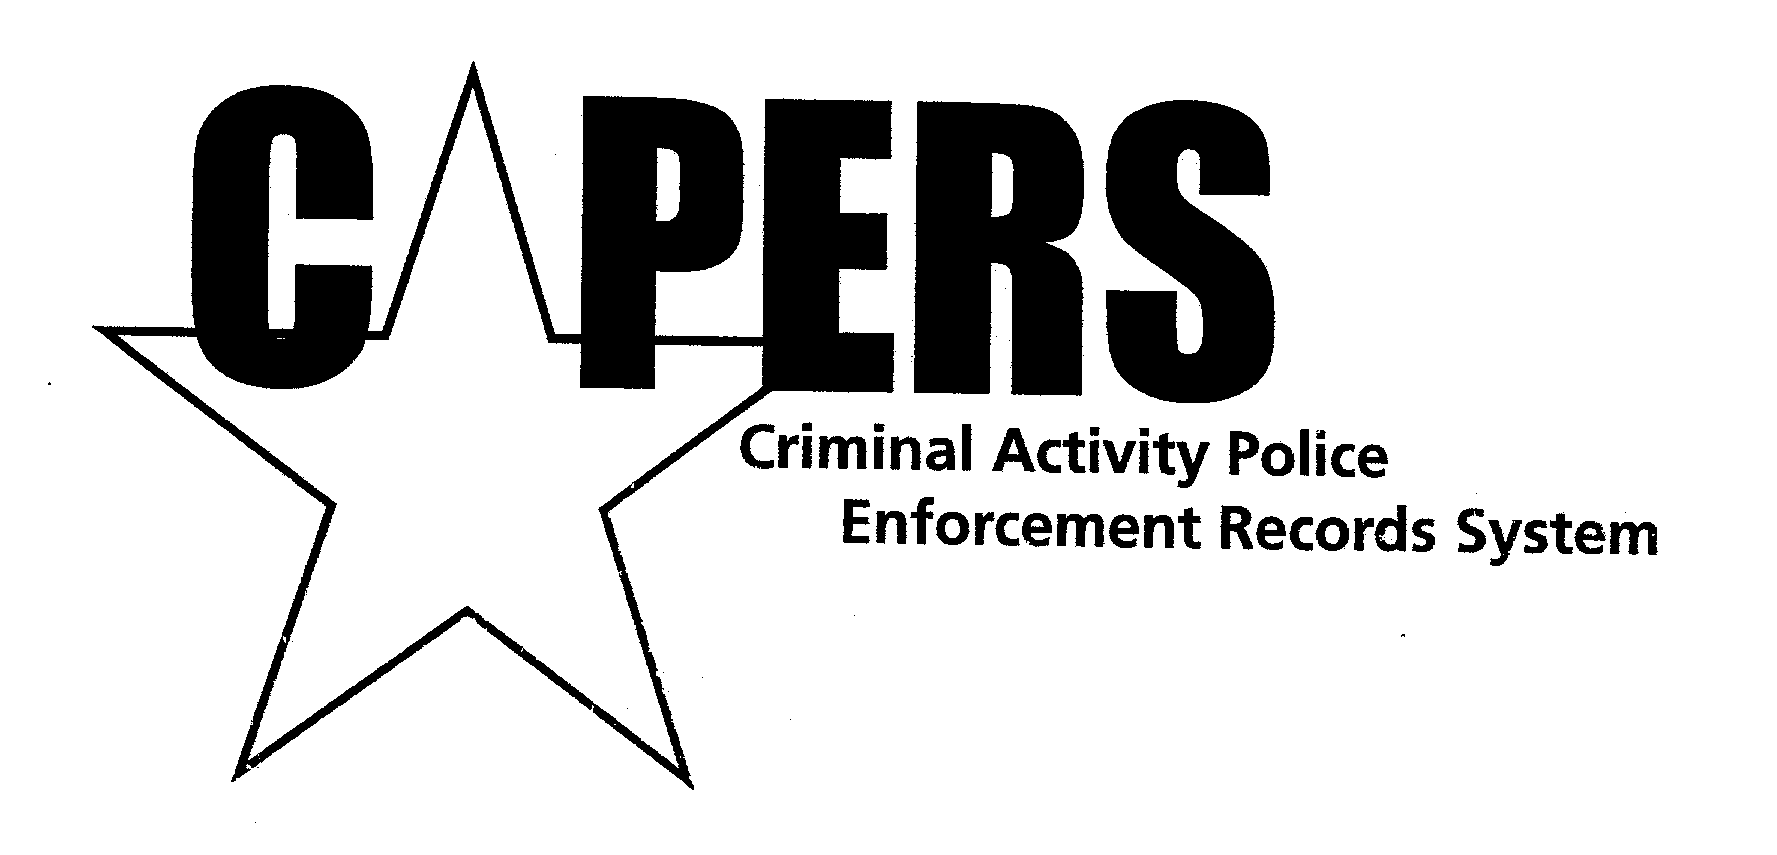 Trademark Logo CAPERS CRIMINAL ACTIVITY POLICE ENFORCEMENT RECORDS SYSTEM